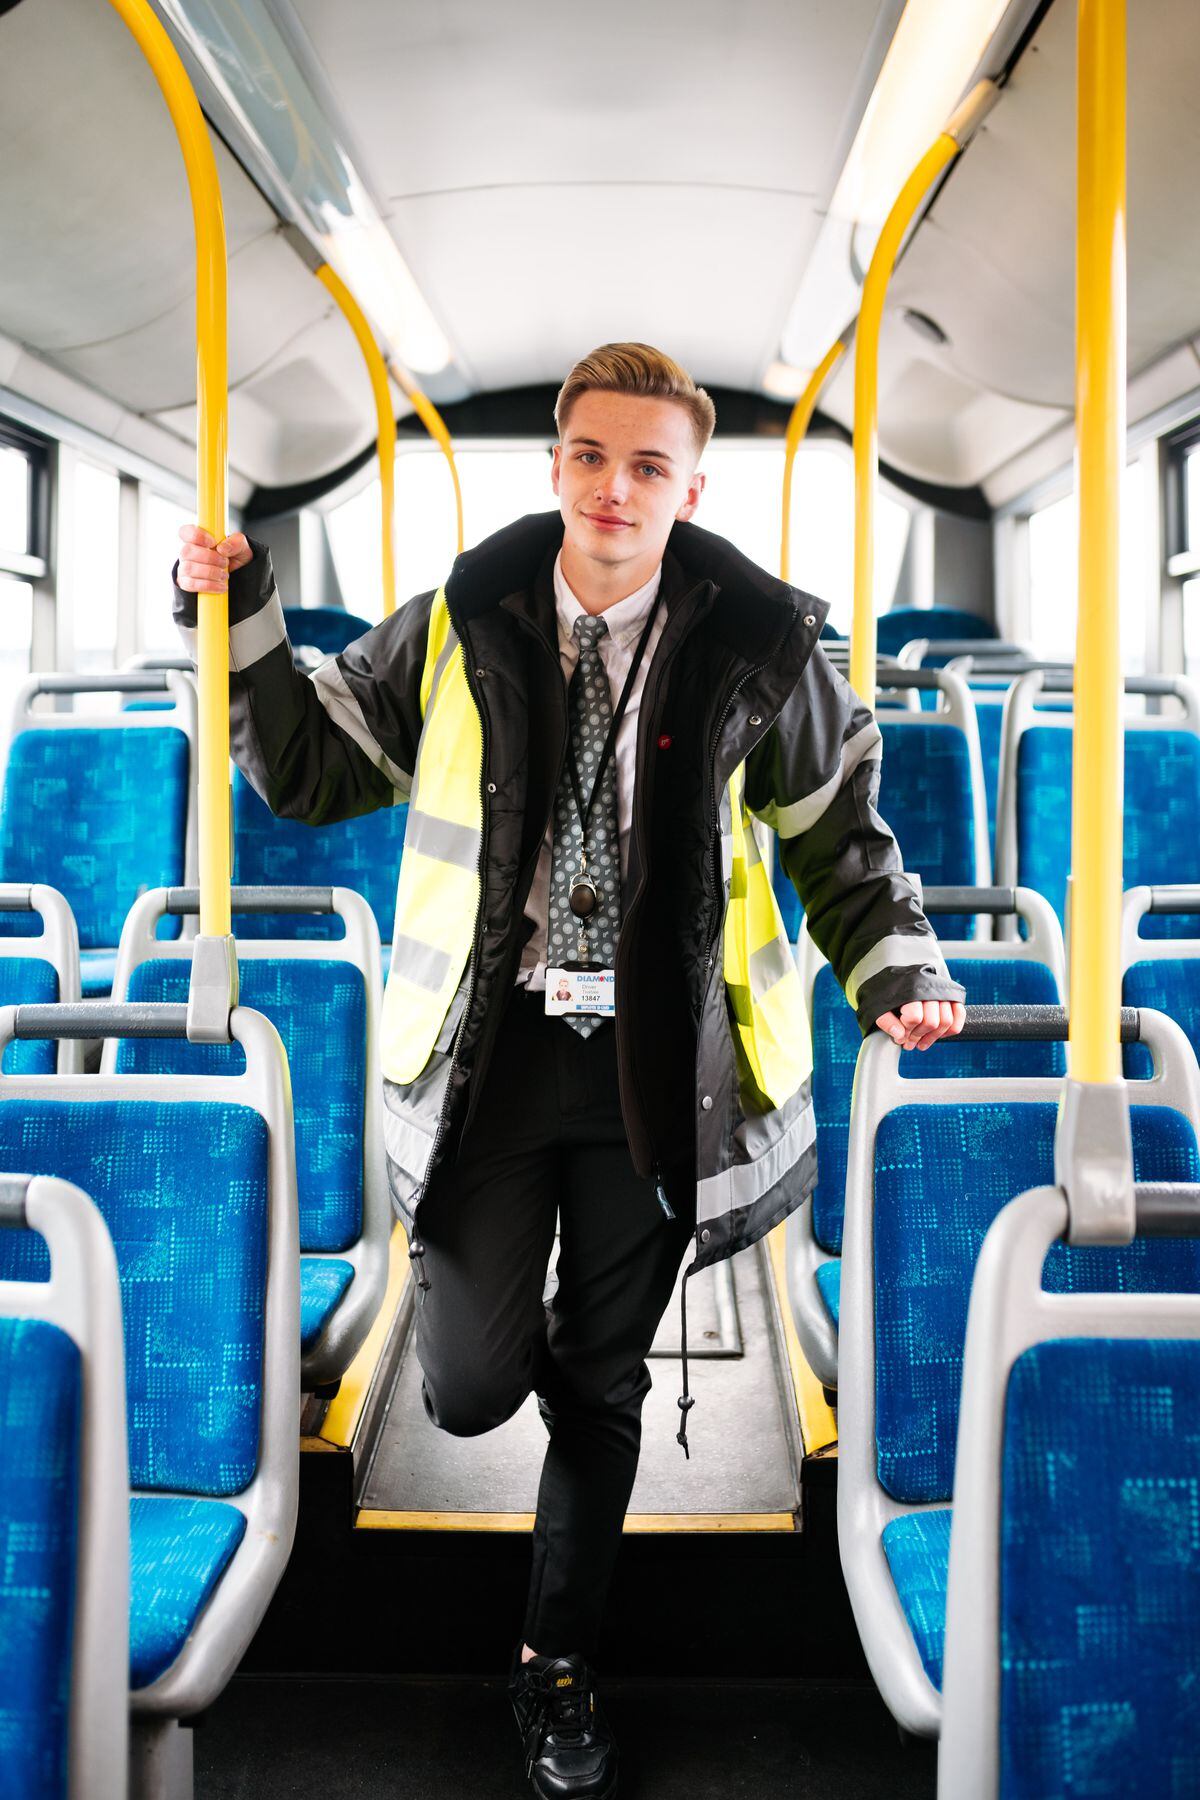 Keenan has been working in the Black Country for Diamond Bus over the last six weeks